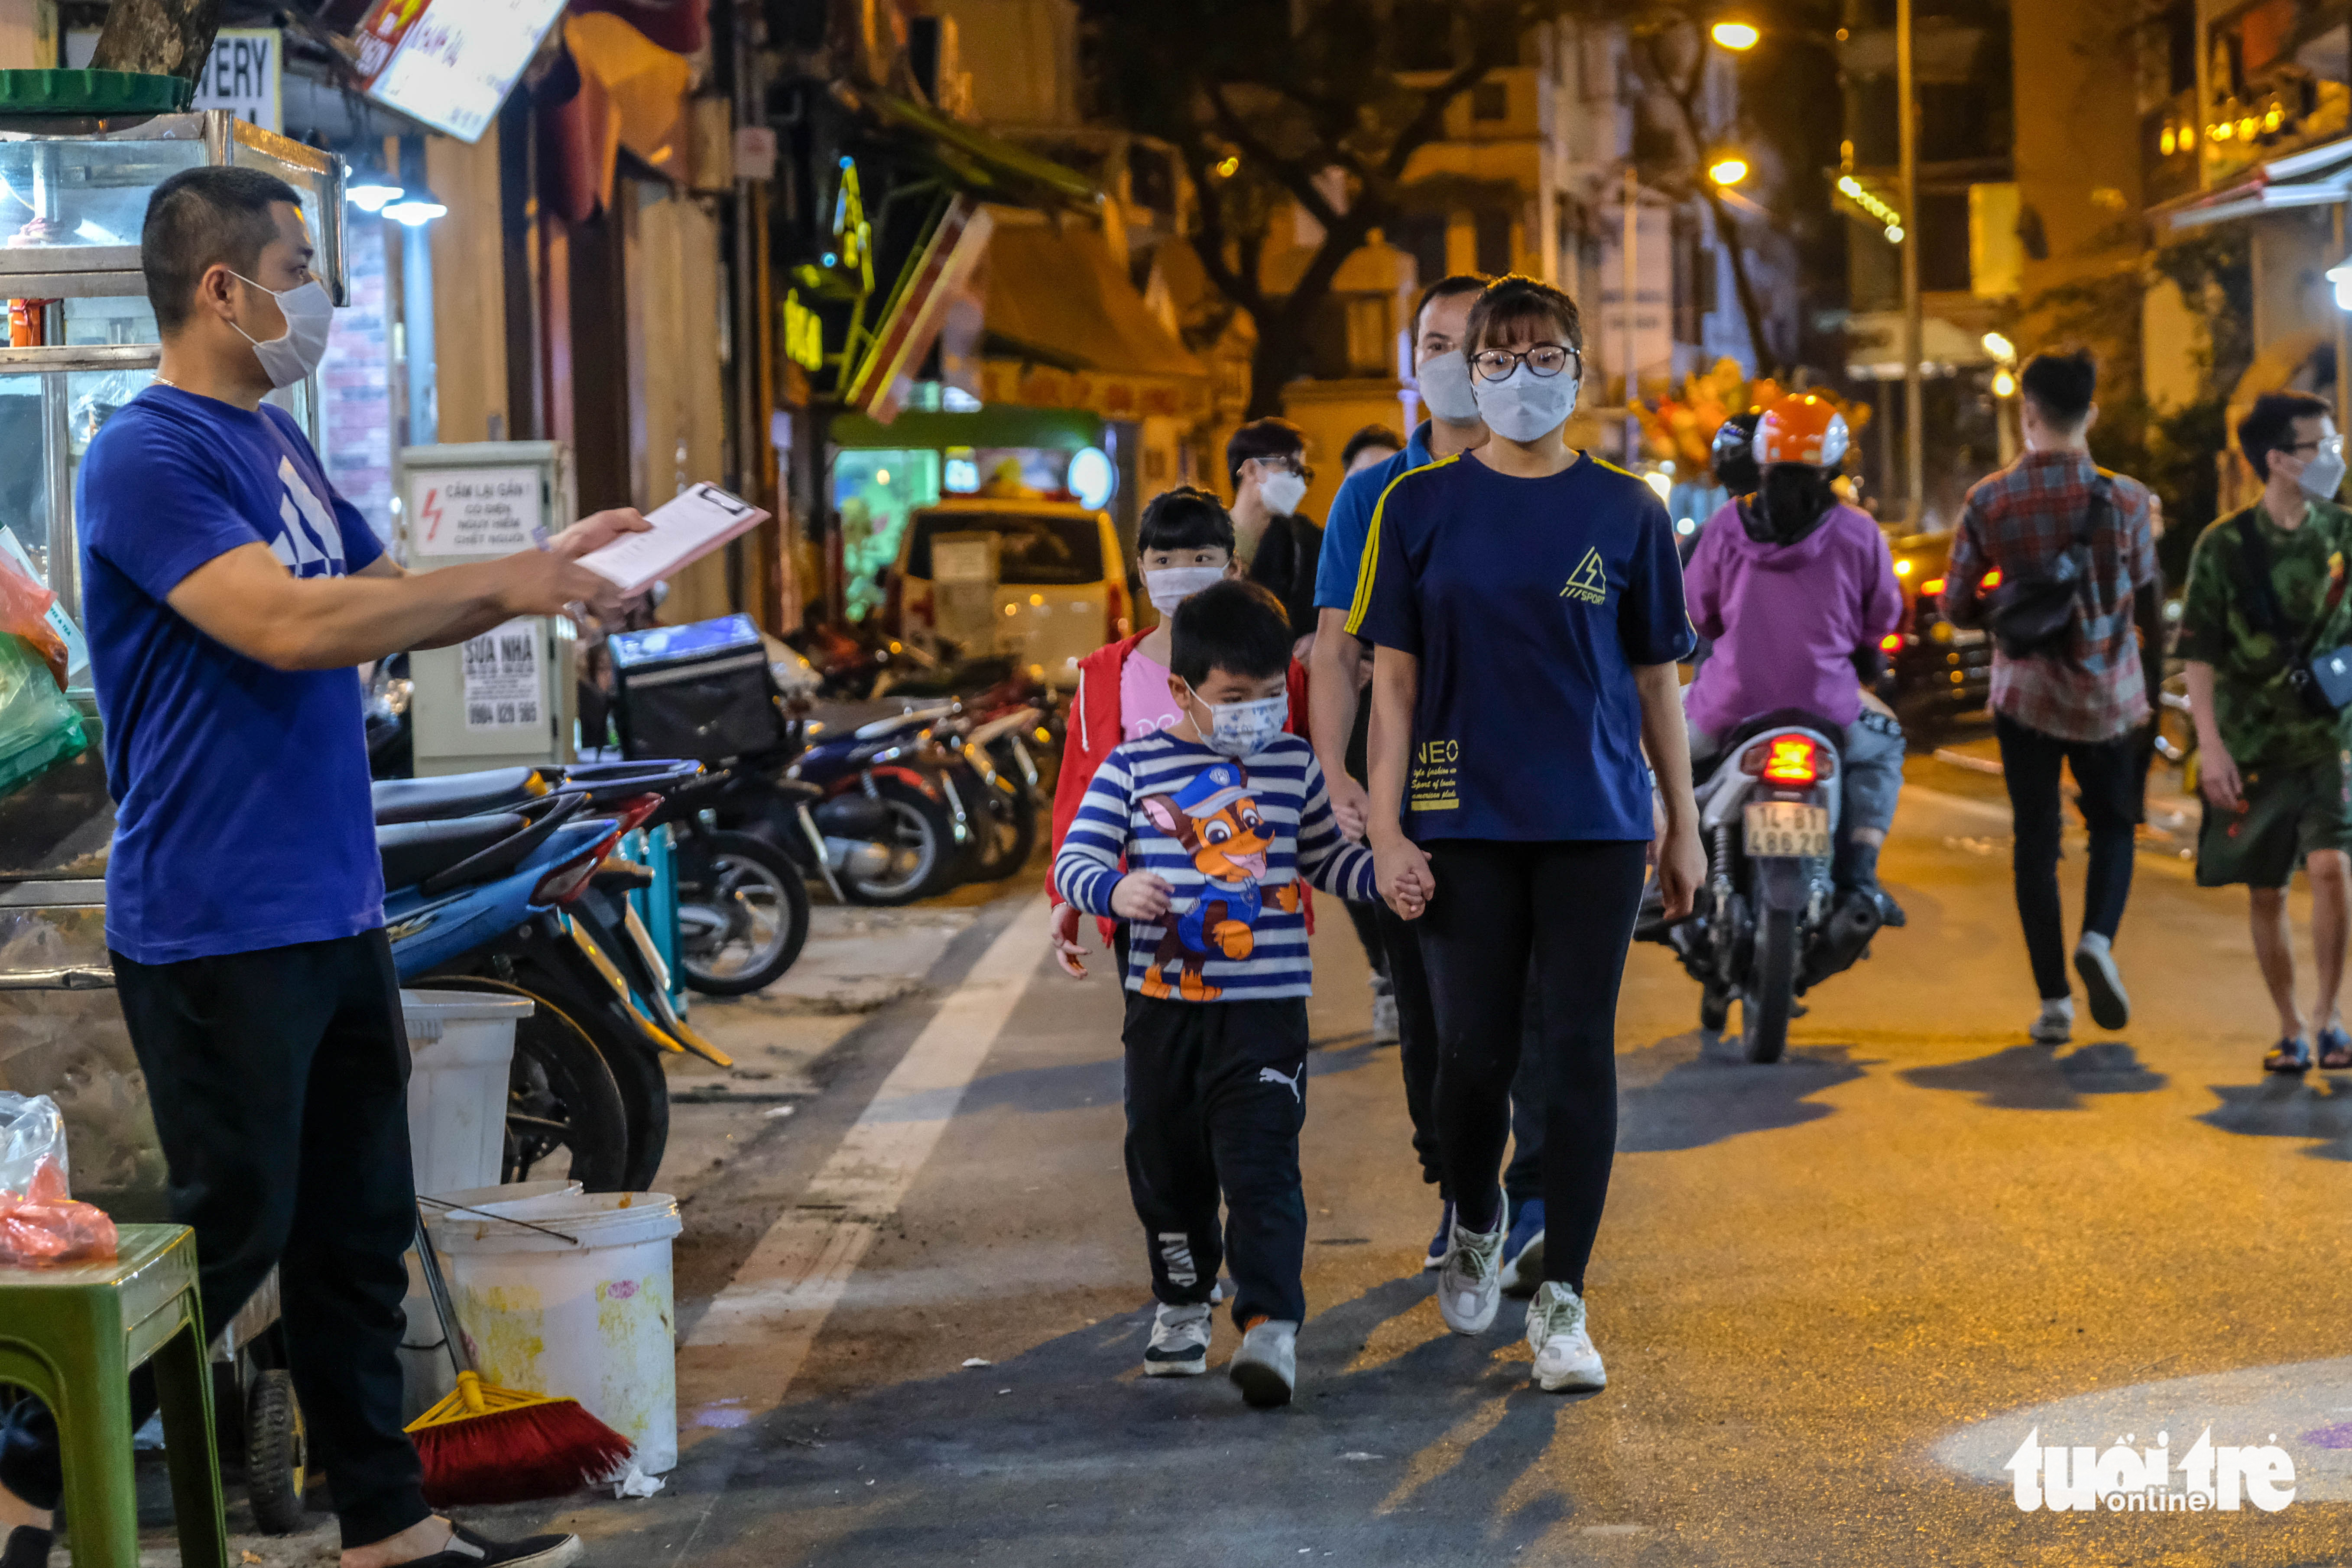 People enjoy nightlife at a corner of Hanoi Old Quarter in Hoan Kiem District, Hanoi on March 15, 2022 after food and beverage establishments are allowed to operate after 9:00 pm. Photo: Ha Quan / Tuoi Tre